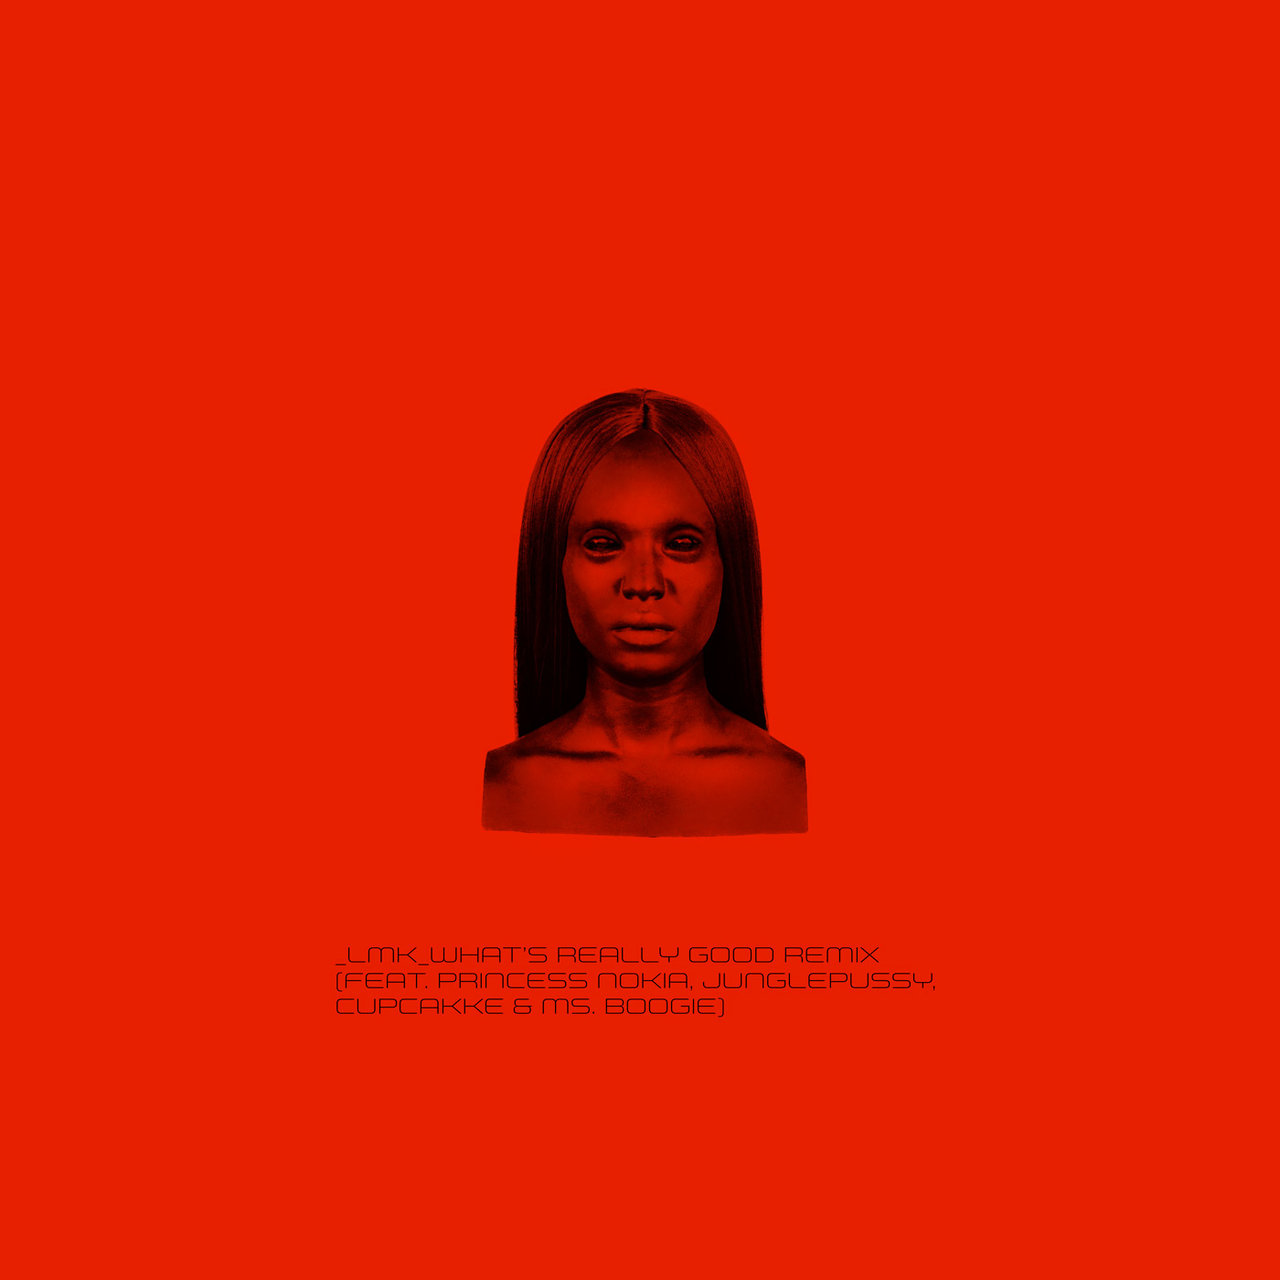 Kelela featuring Princess Nokia, Junglepussy, CupcakKe, & Ms. Boogie — LMK_WHAT’S REALLY GOOD REMIX_ FEAT_PRINCESS NOKIA_JUNGLEPUSSY_CUPCAKKE_MS. BOOGIE_100 BPM cover artwork